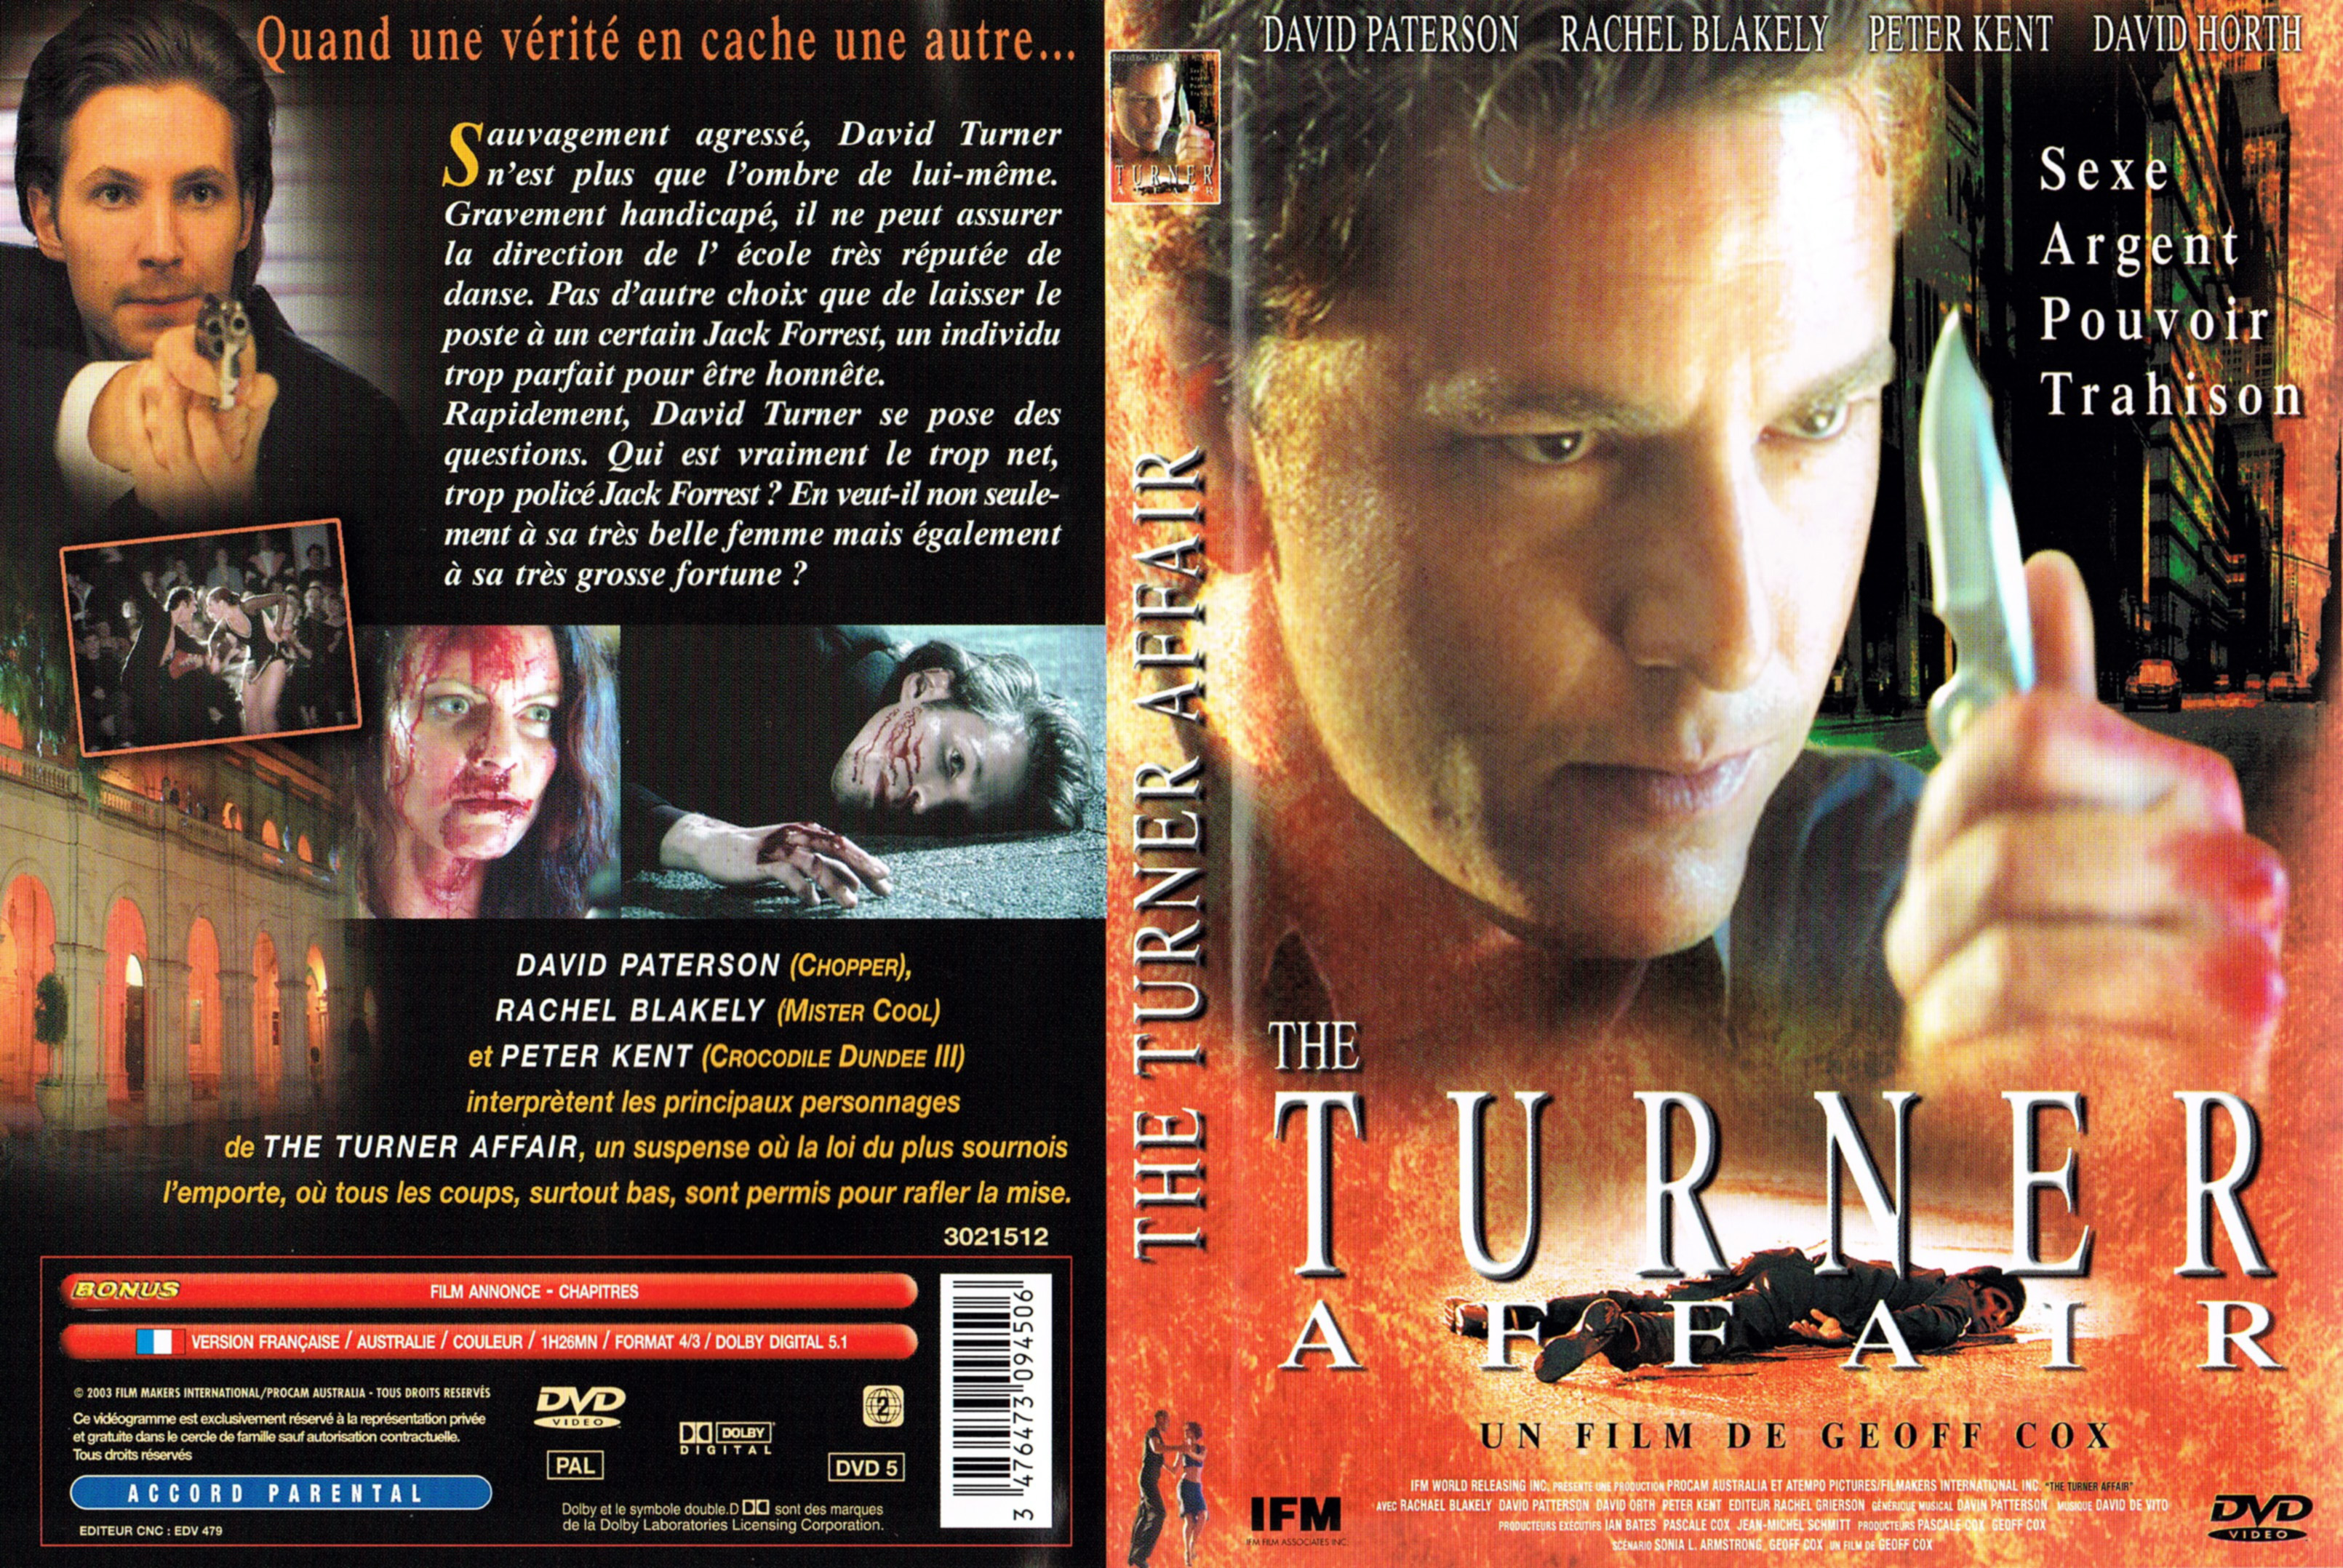 Jaquette DVD The Turner Affair